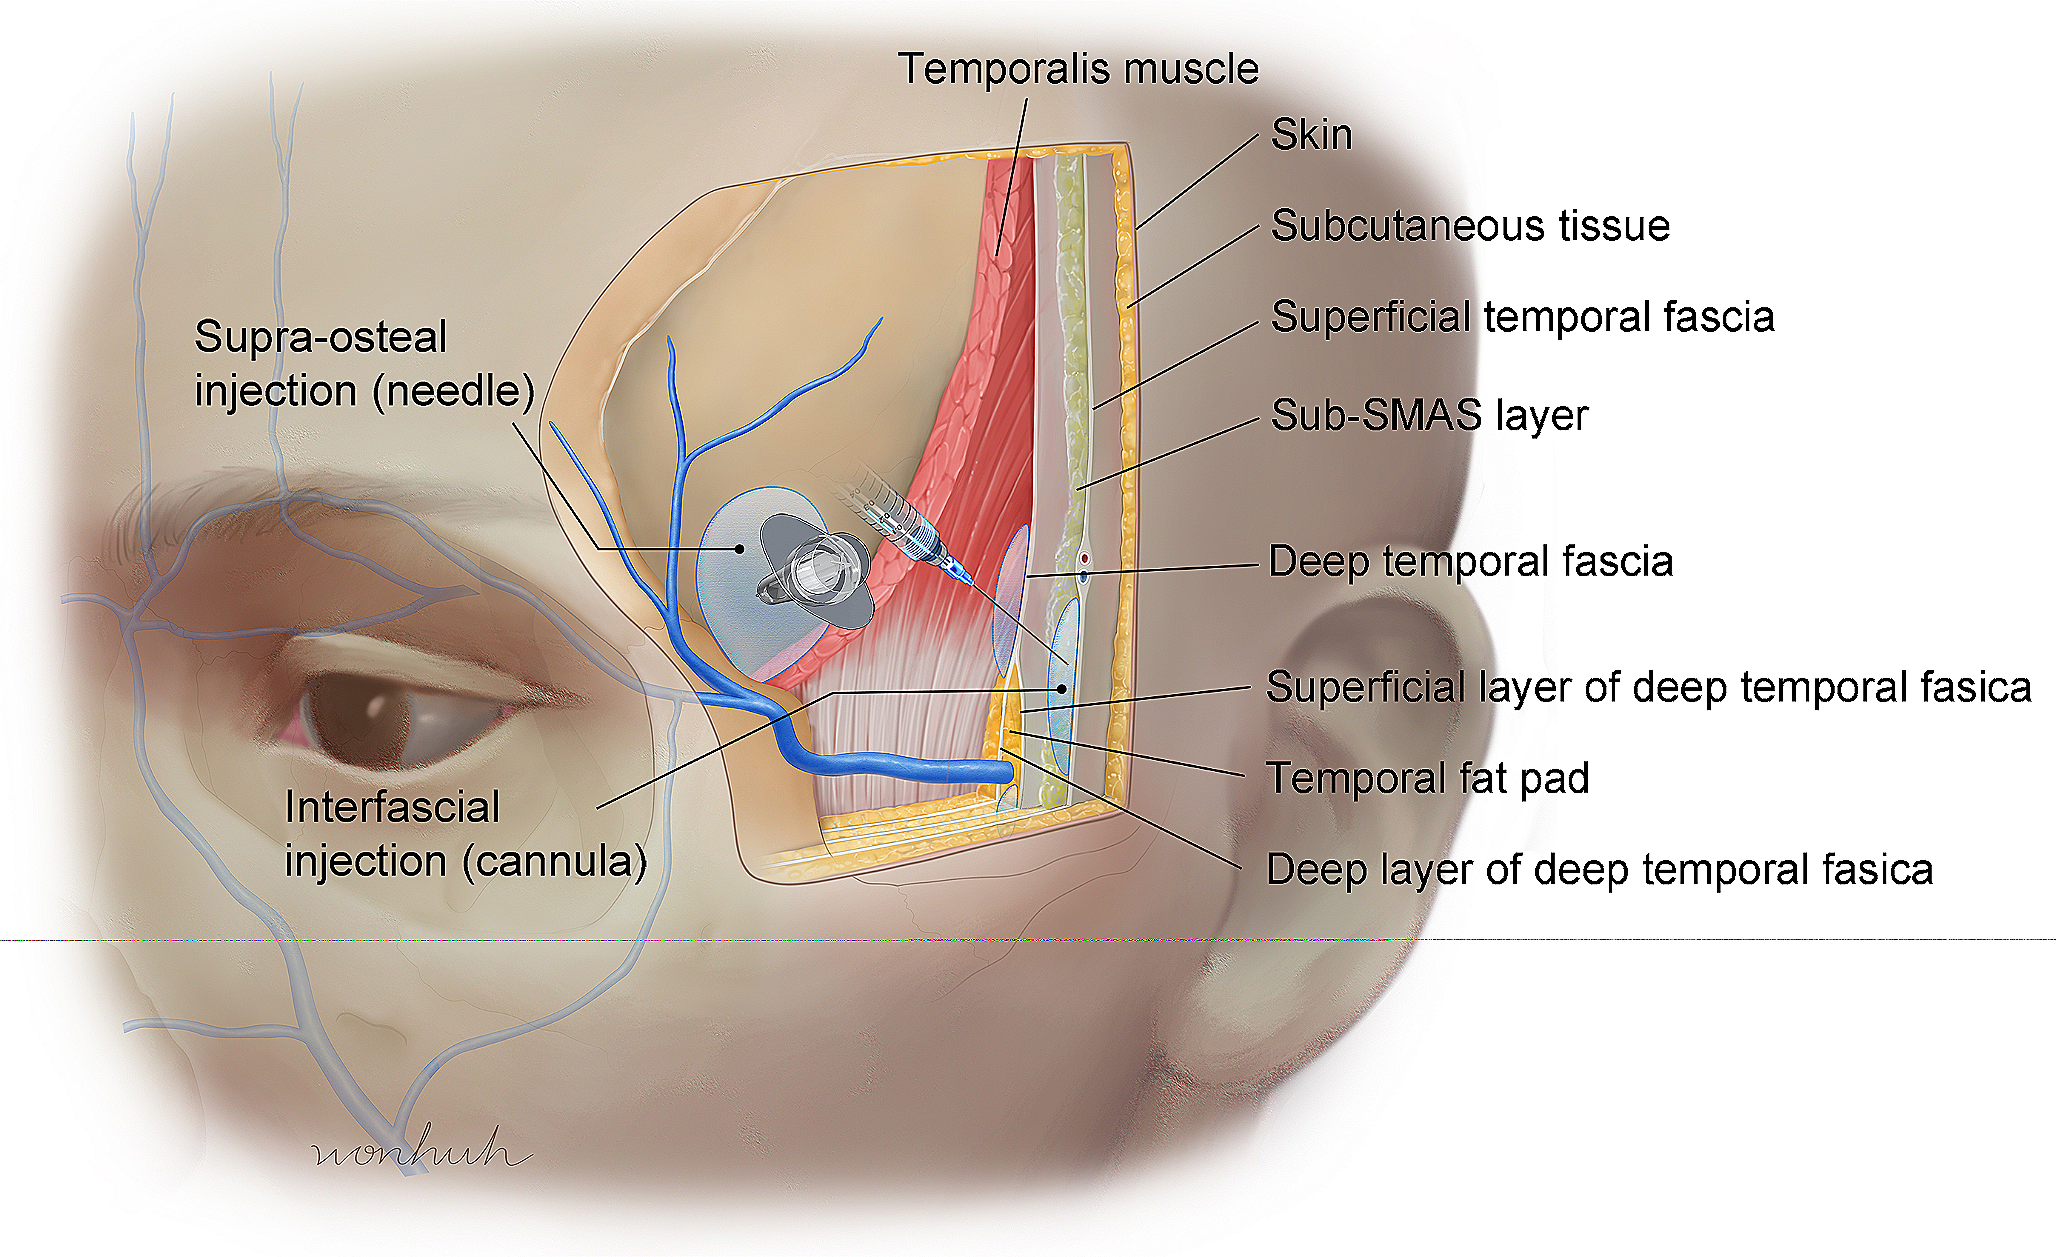 Anatomy of the temporal region to guide filler injections